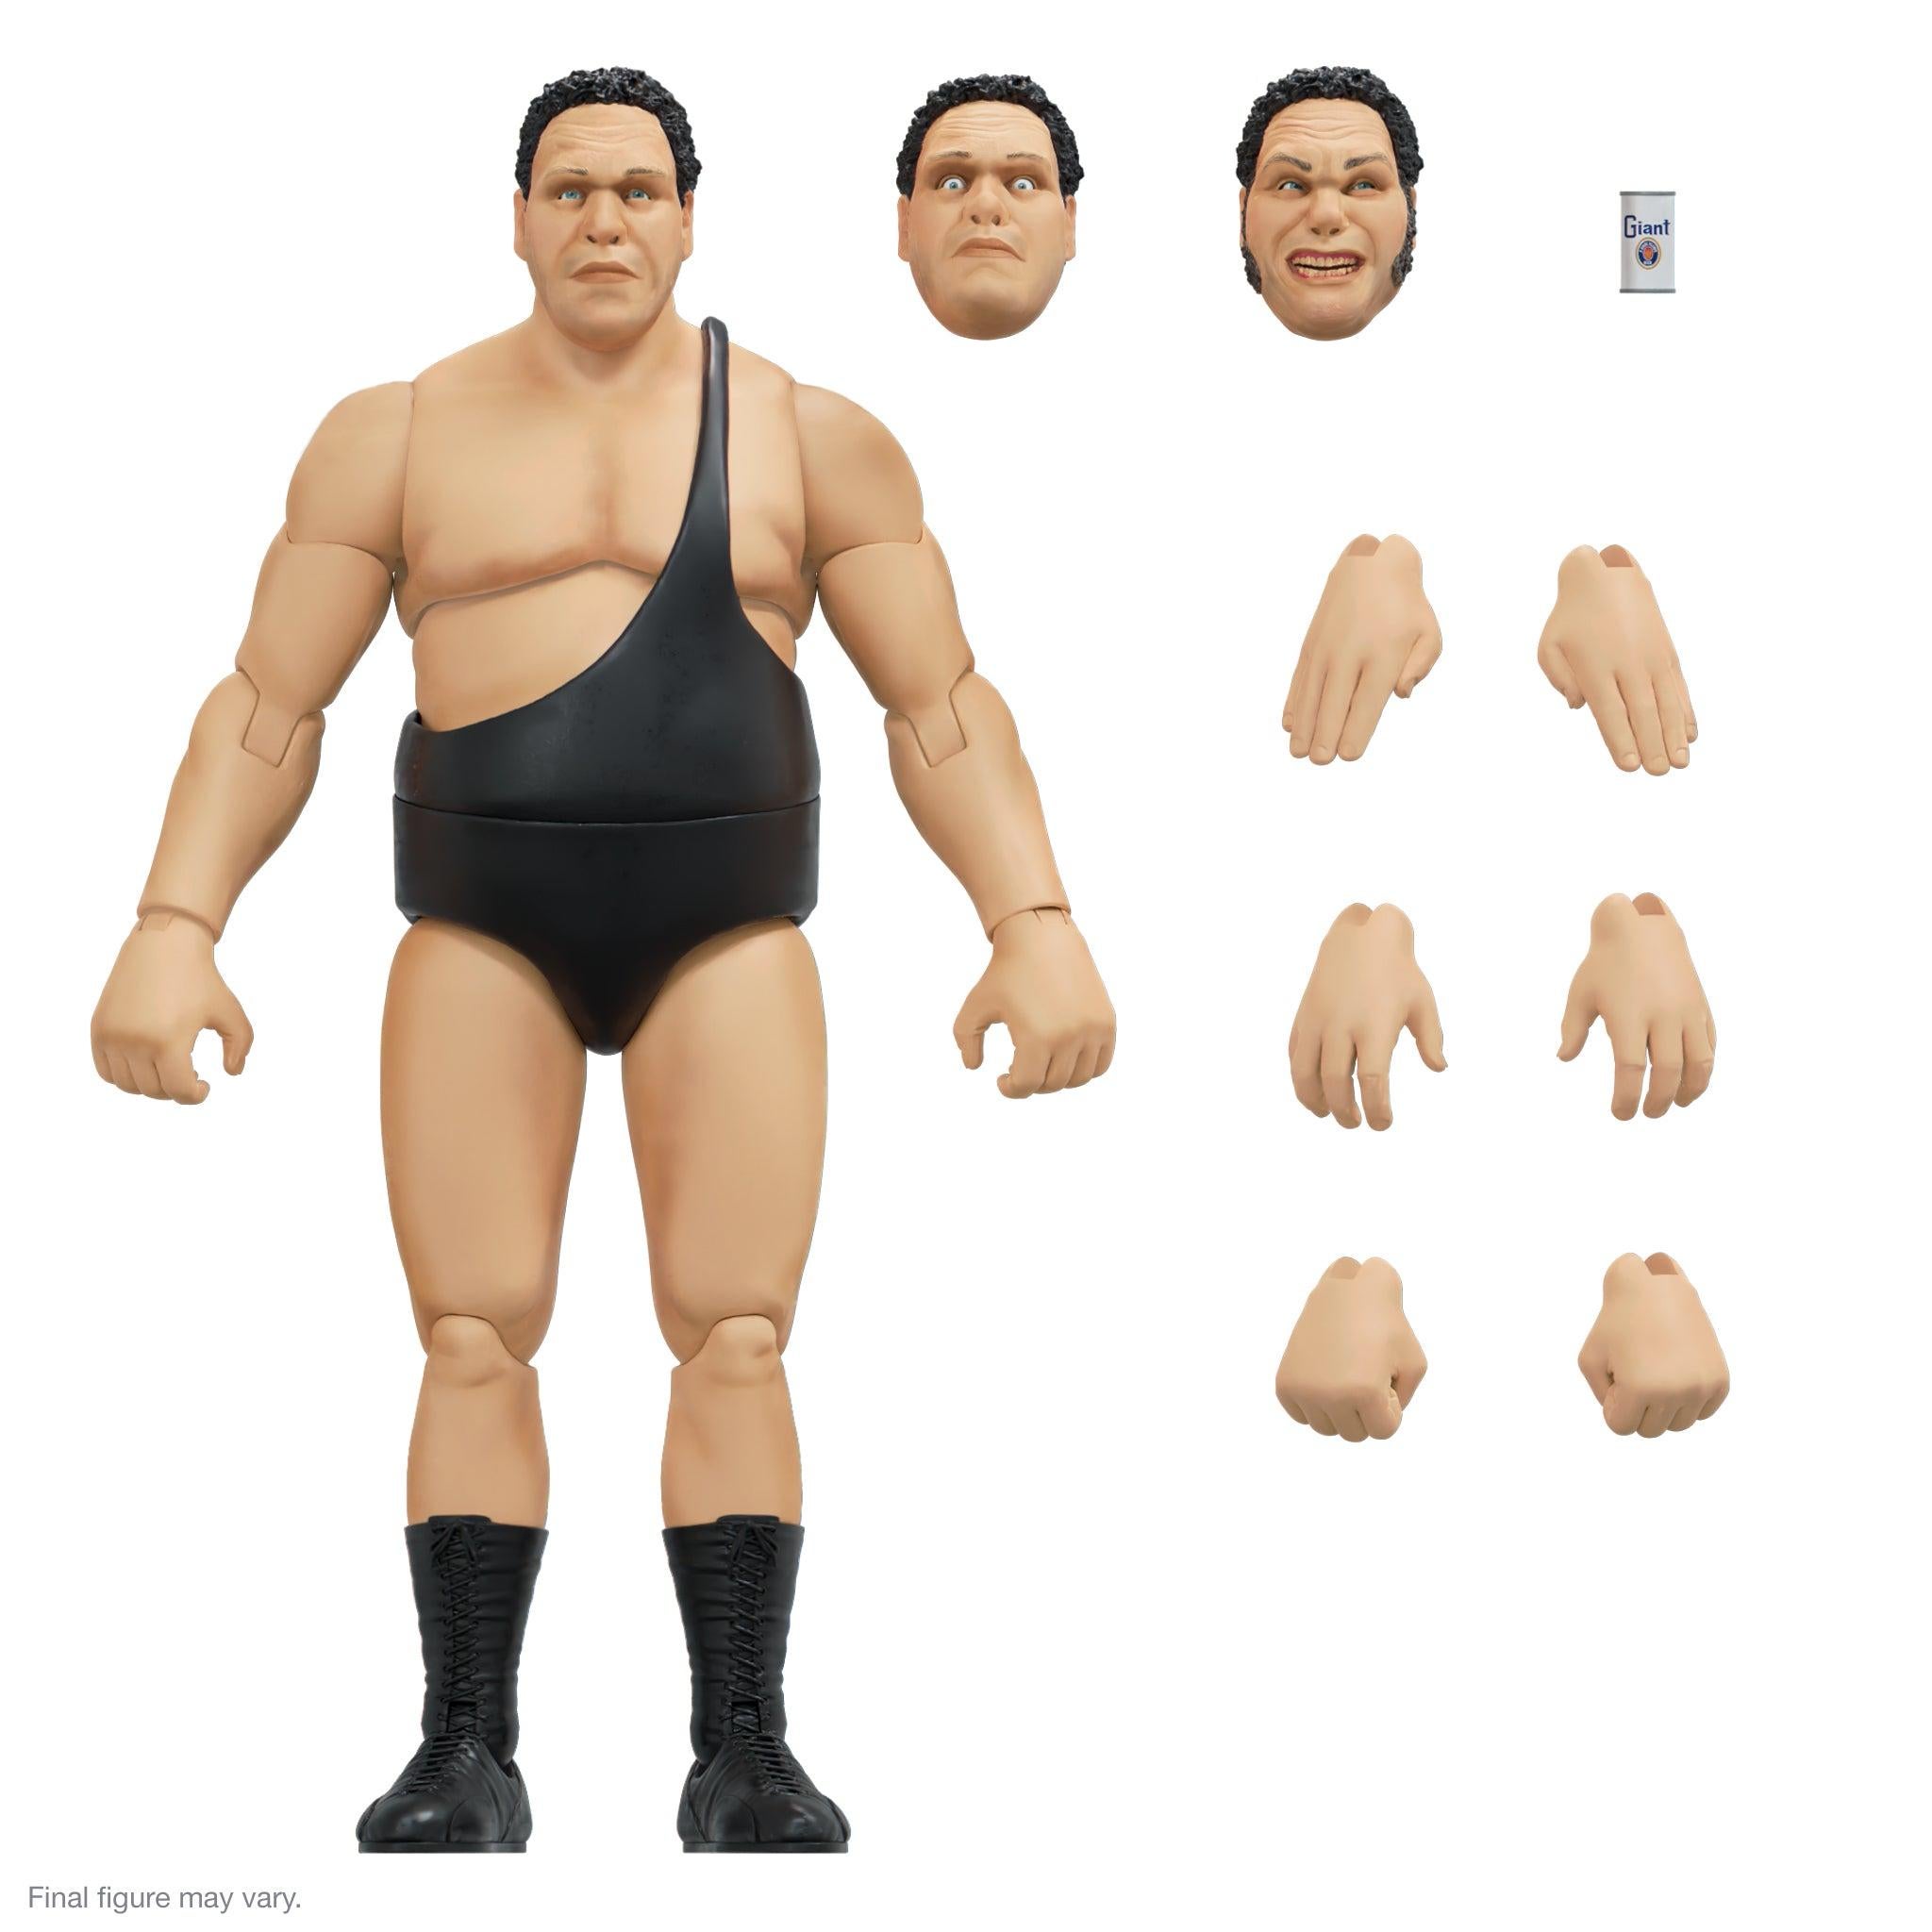 andre-the-giant-ultimates-figure-1.jpg